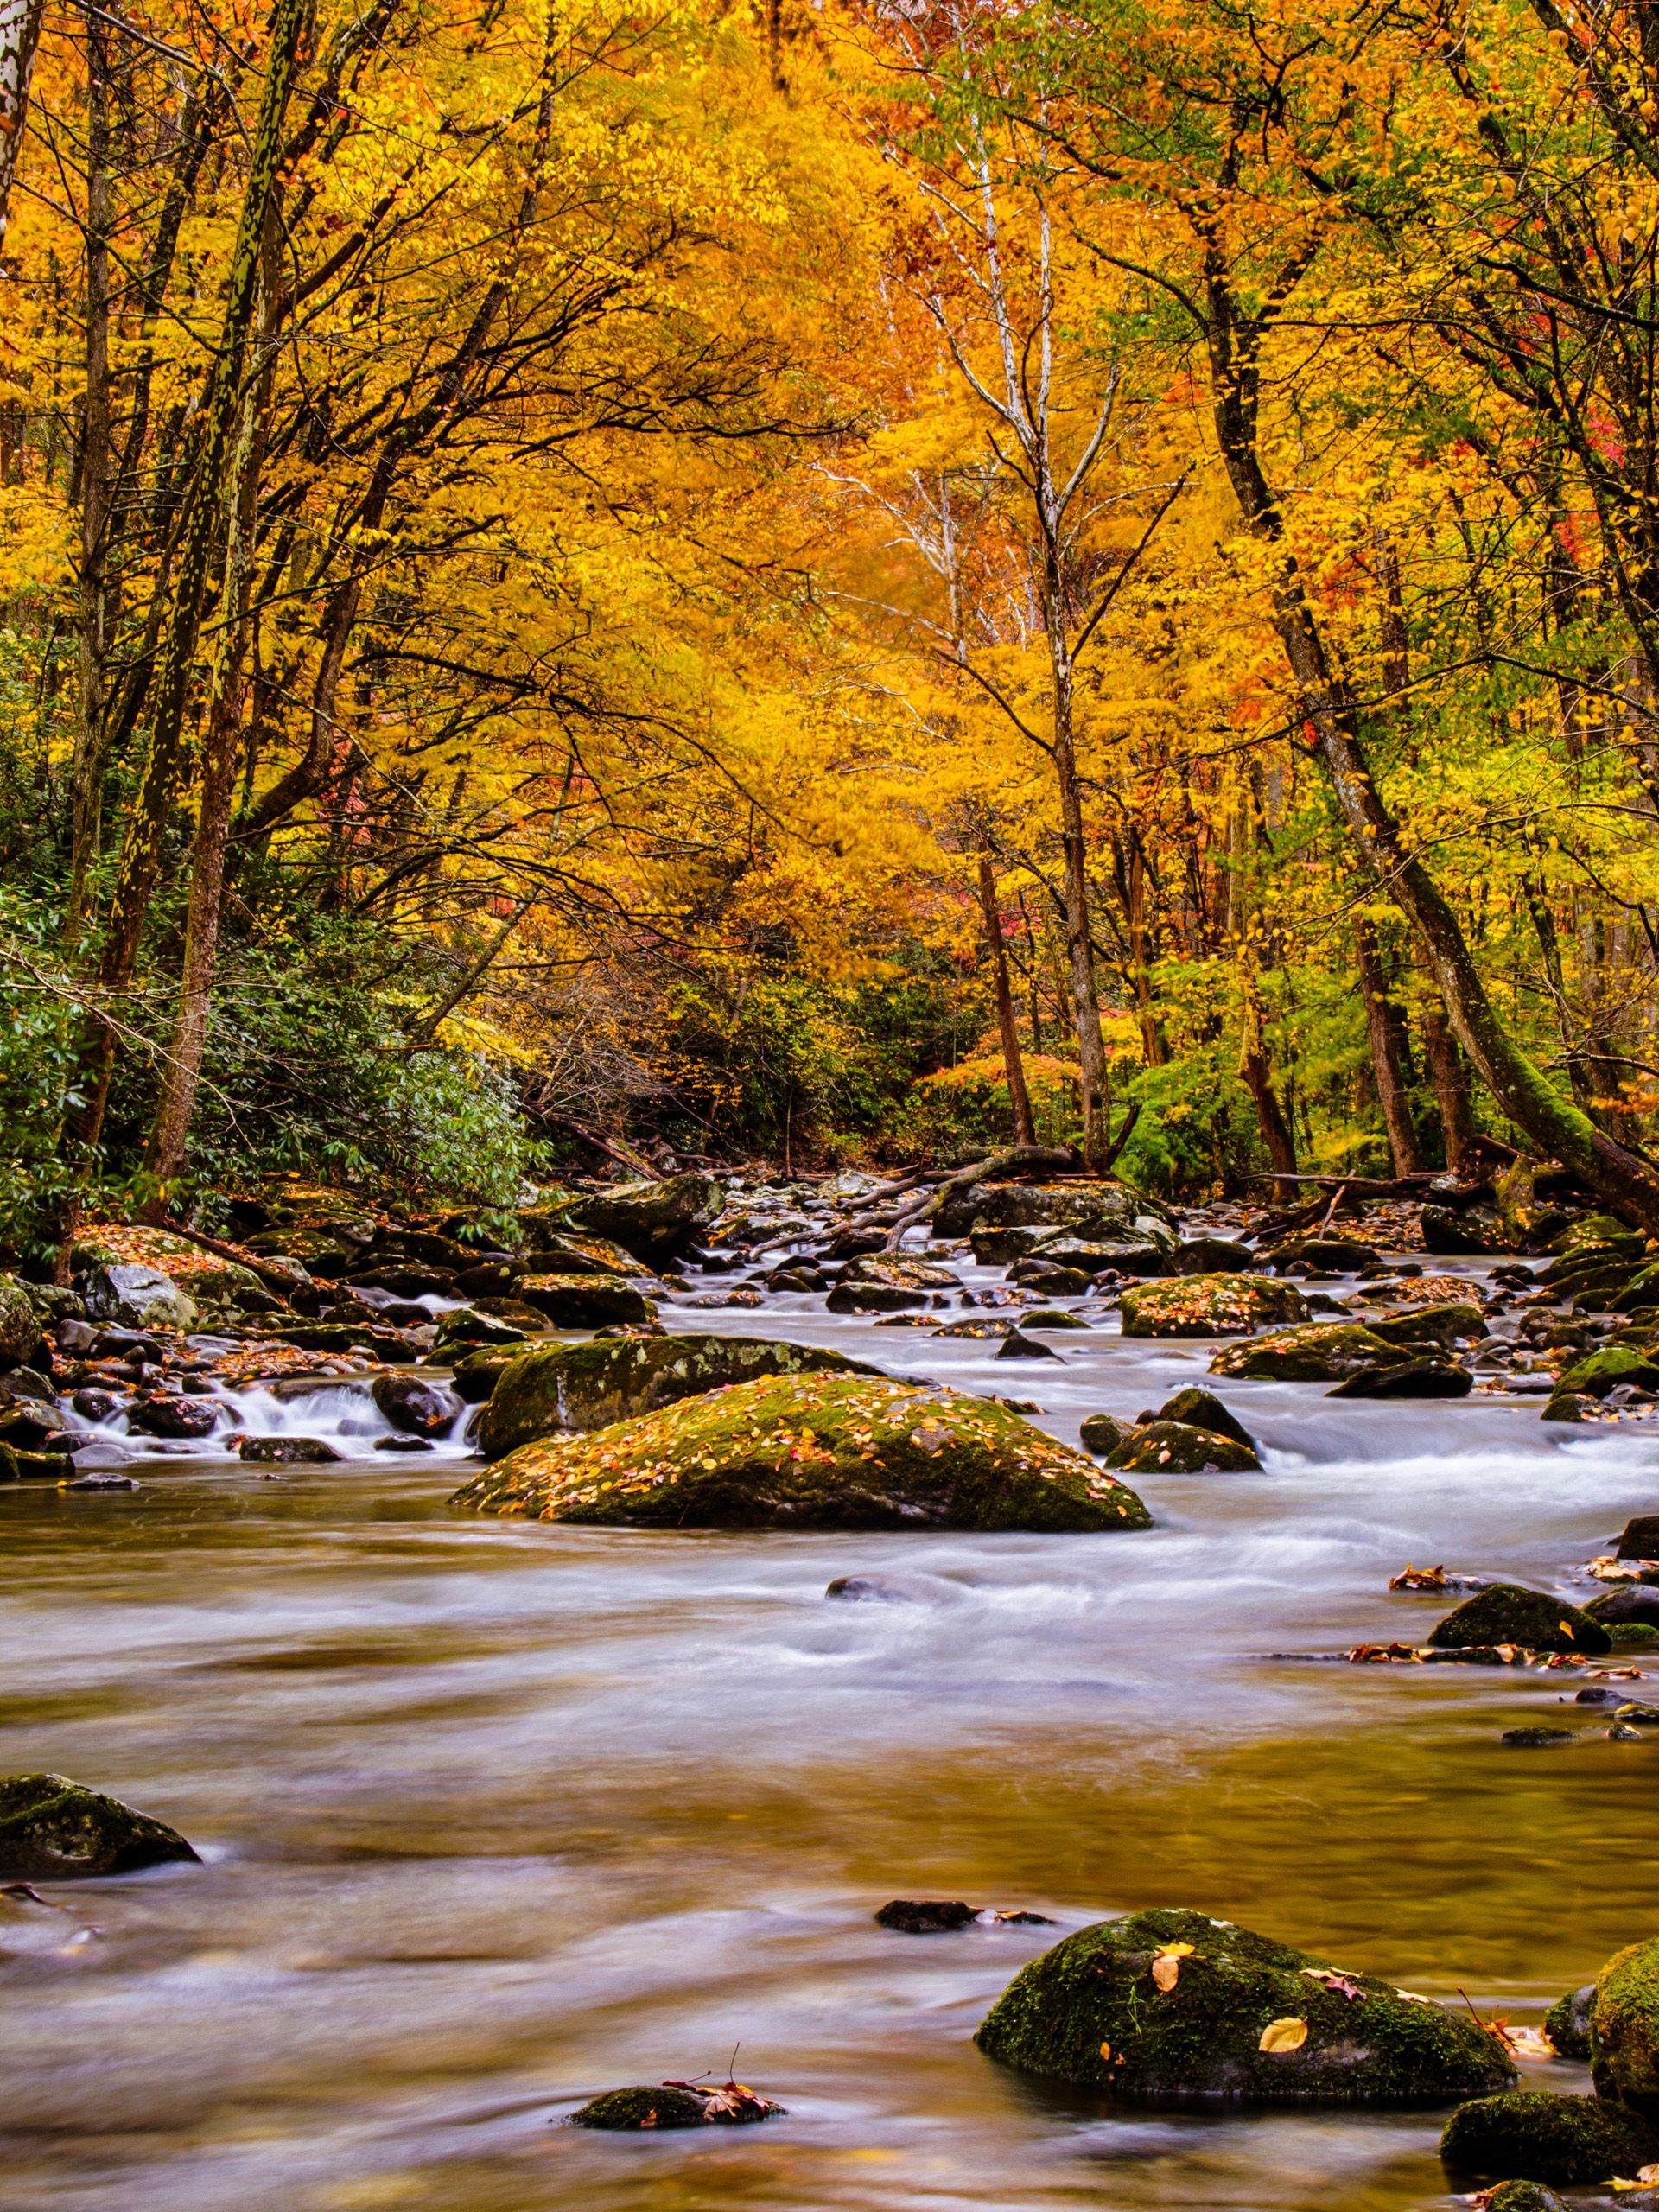 Nature Picture of Autumn Forest in the Great Smoky Mountain